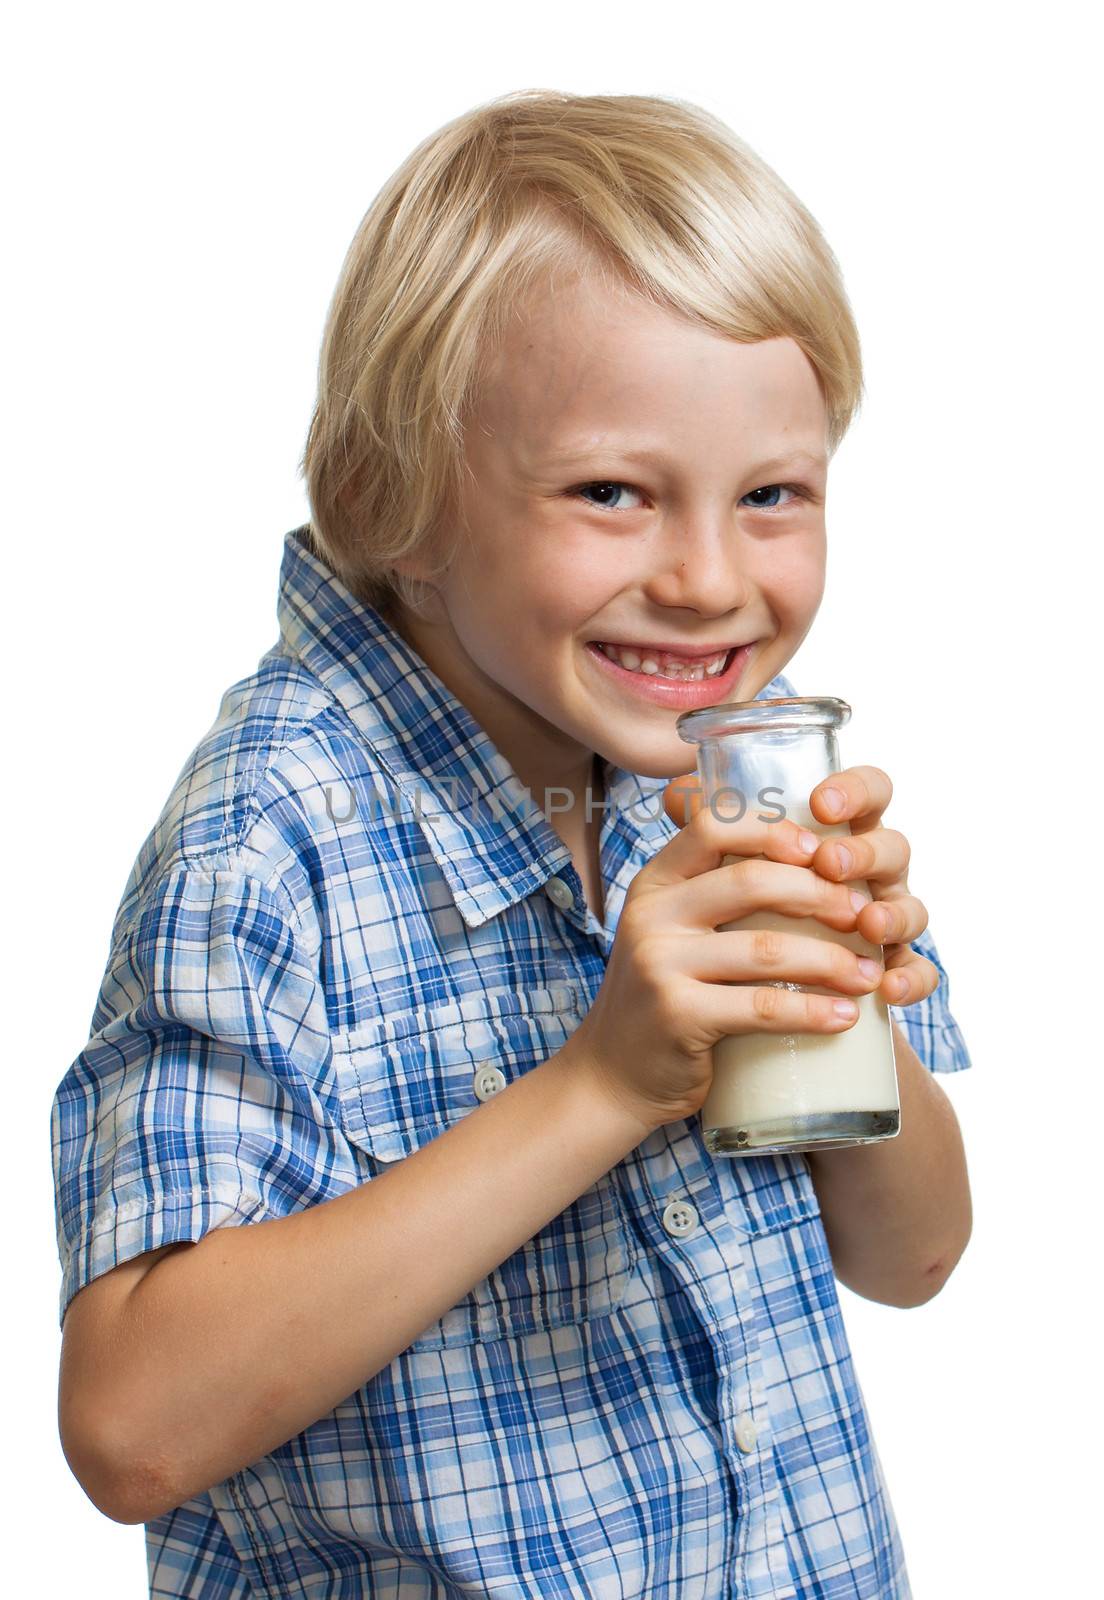 Happy cute boy giggling and holding a bottle of milk to his mouth. Isolated on white.